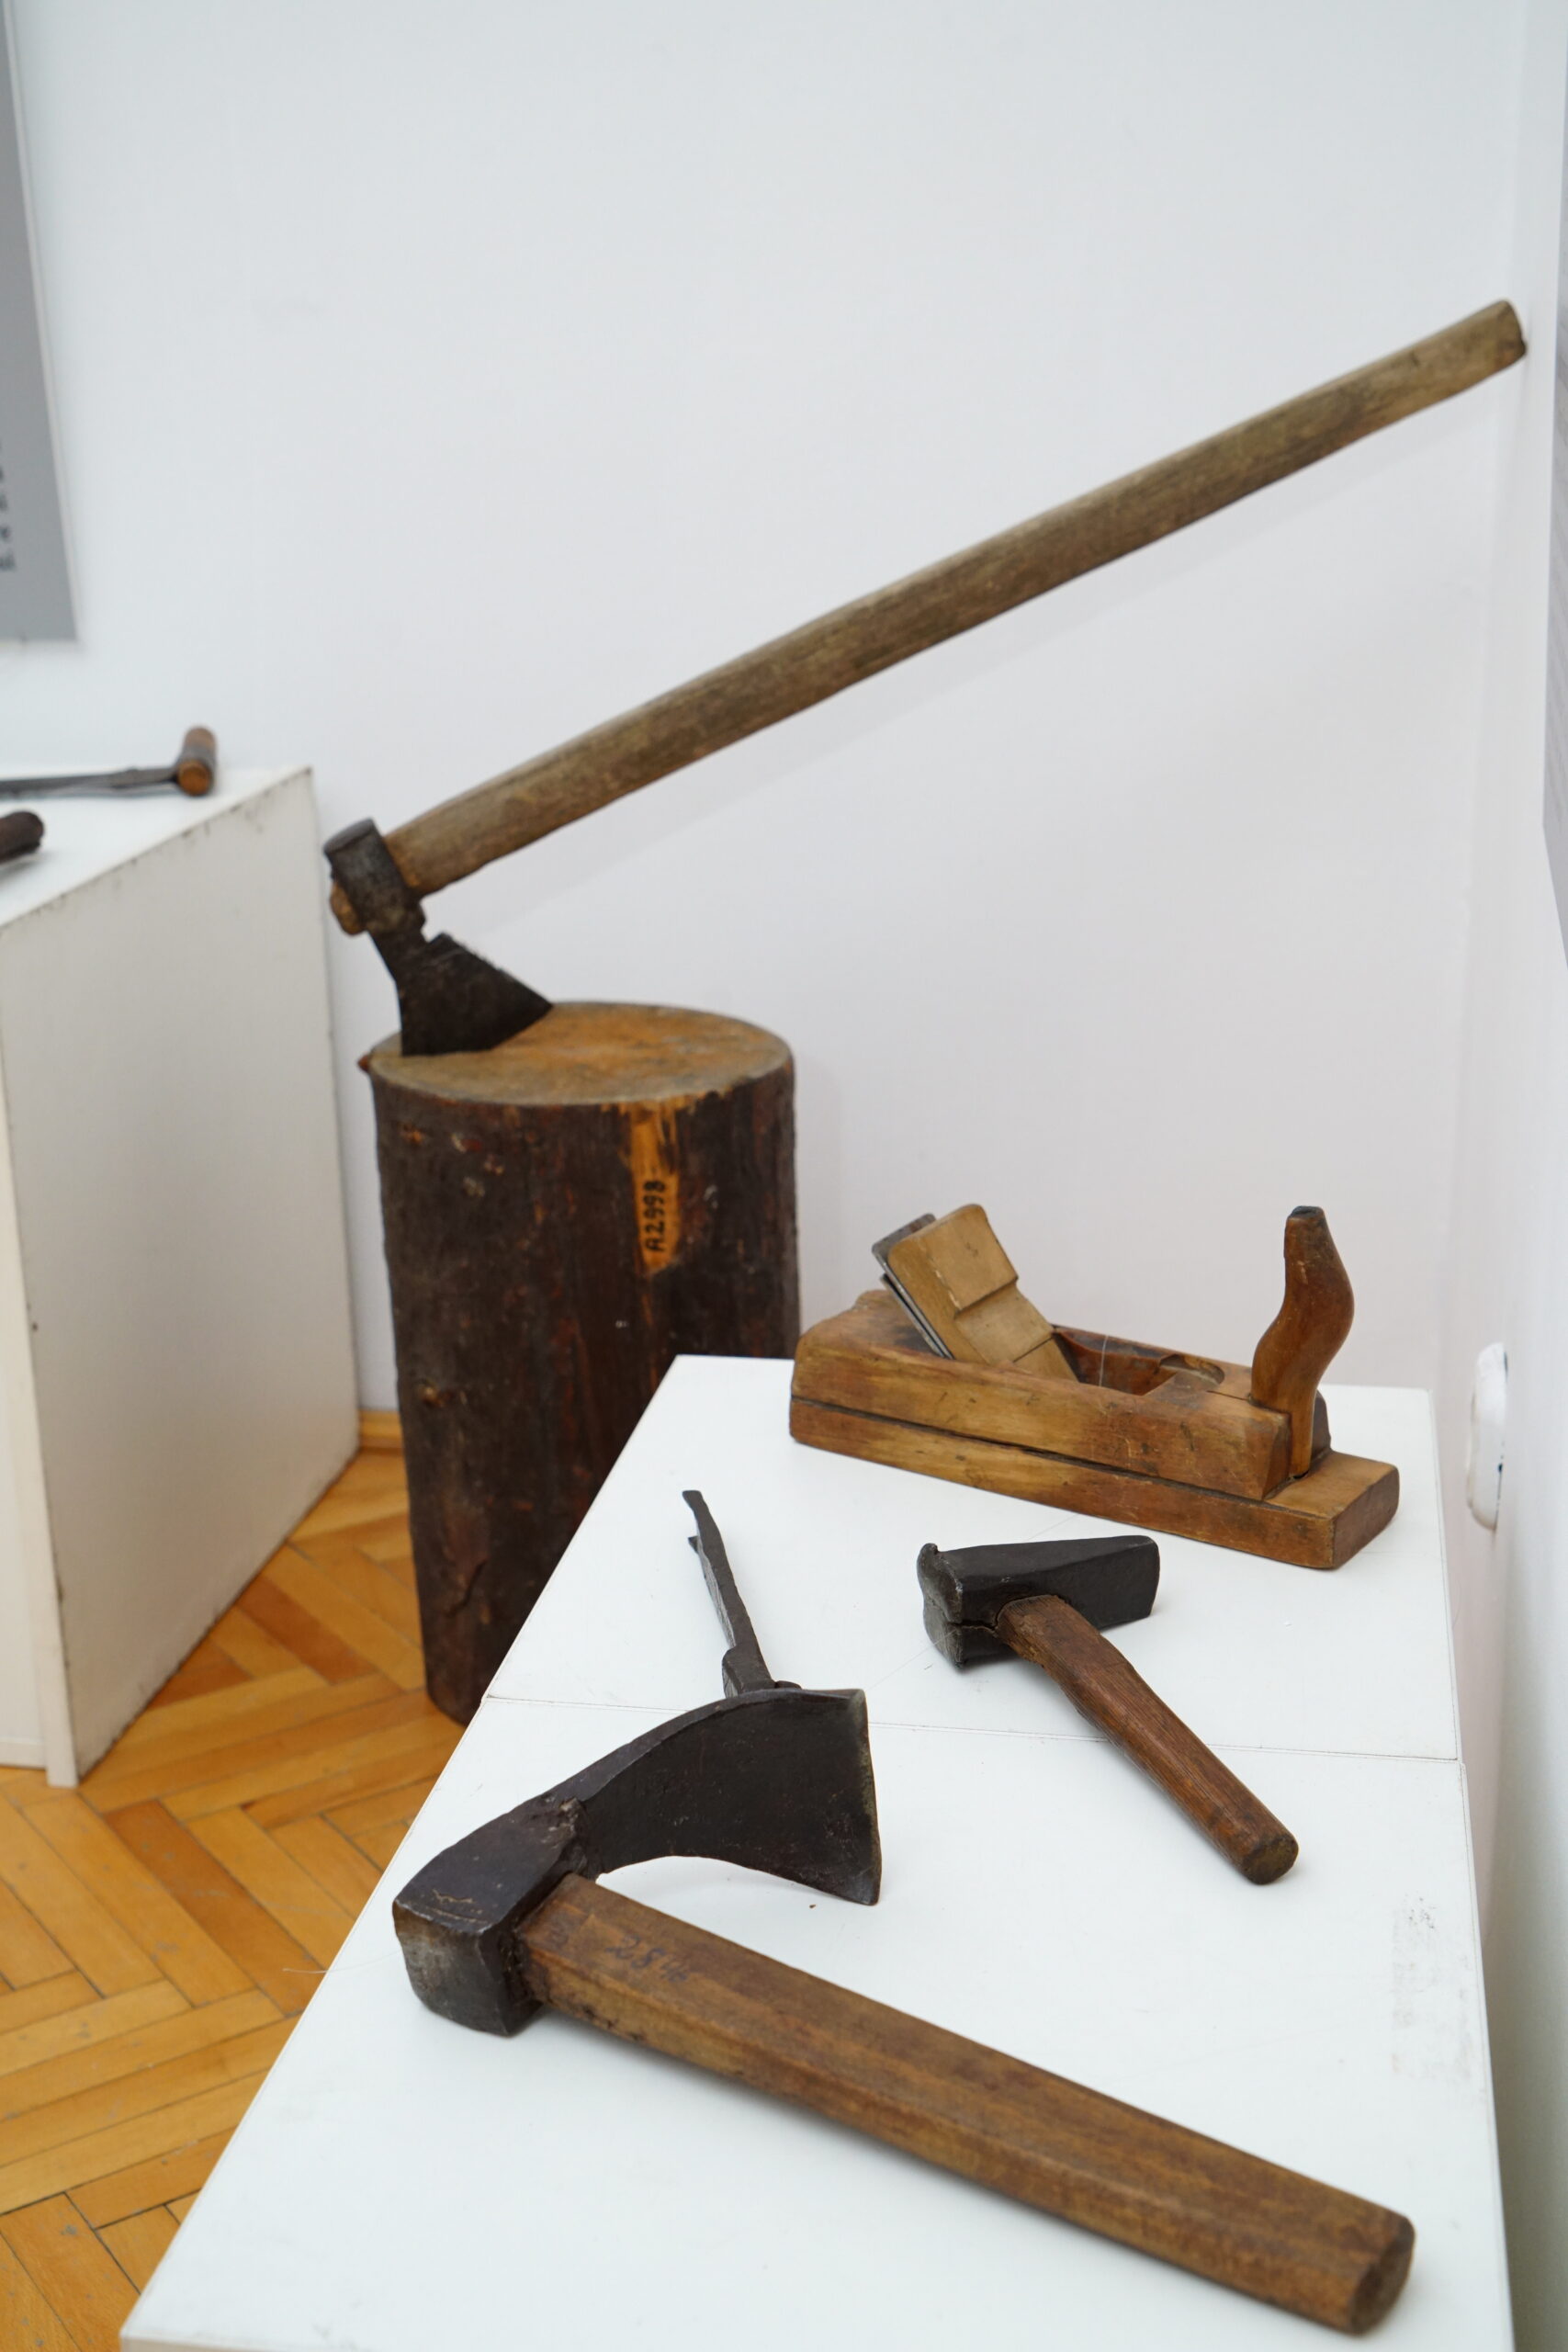 Artefacts in the innovative exhibition: carpentry tools